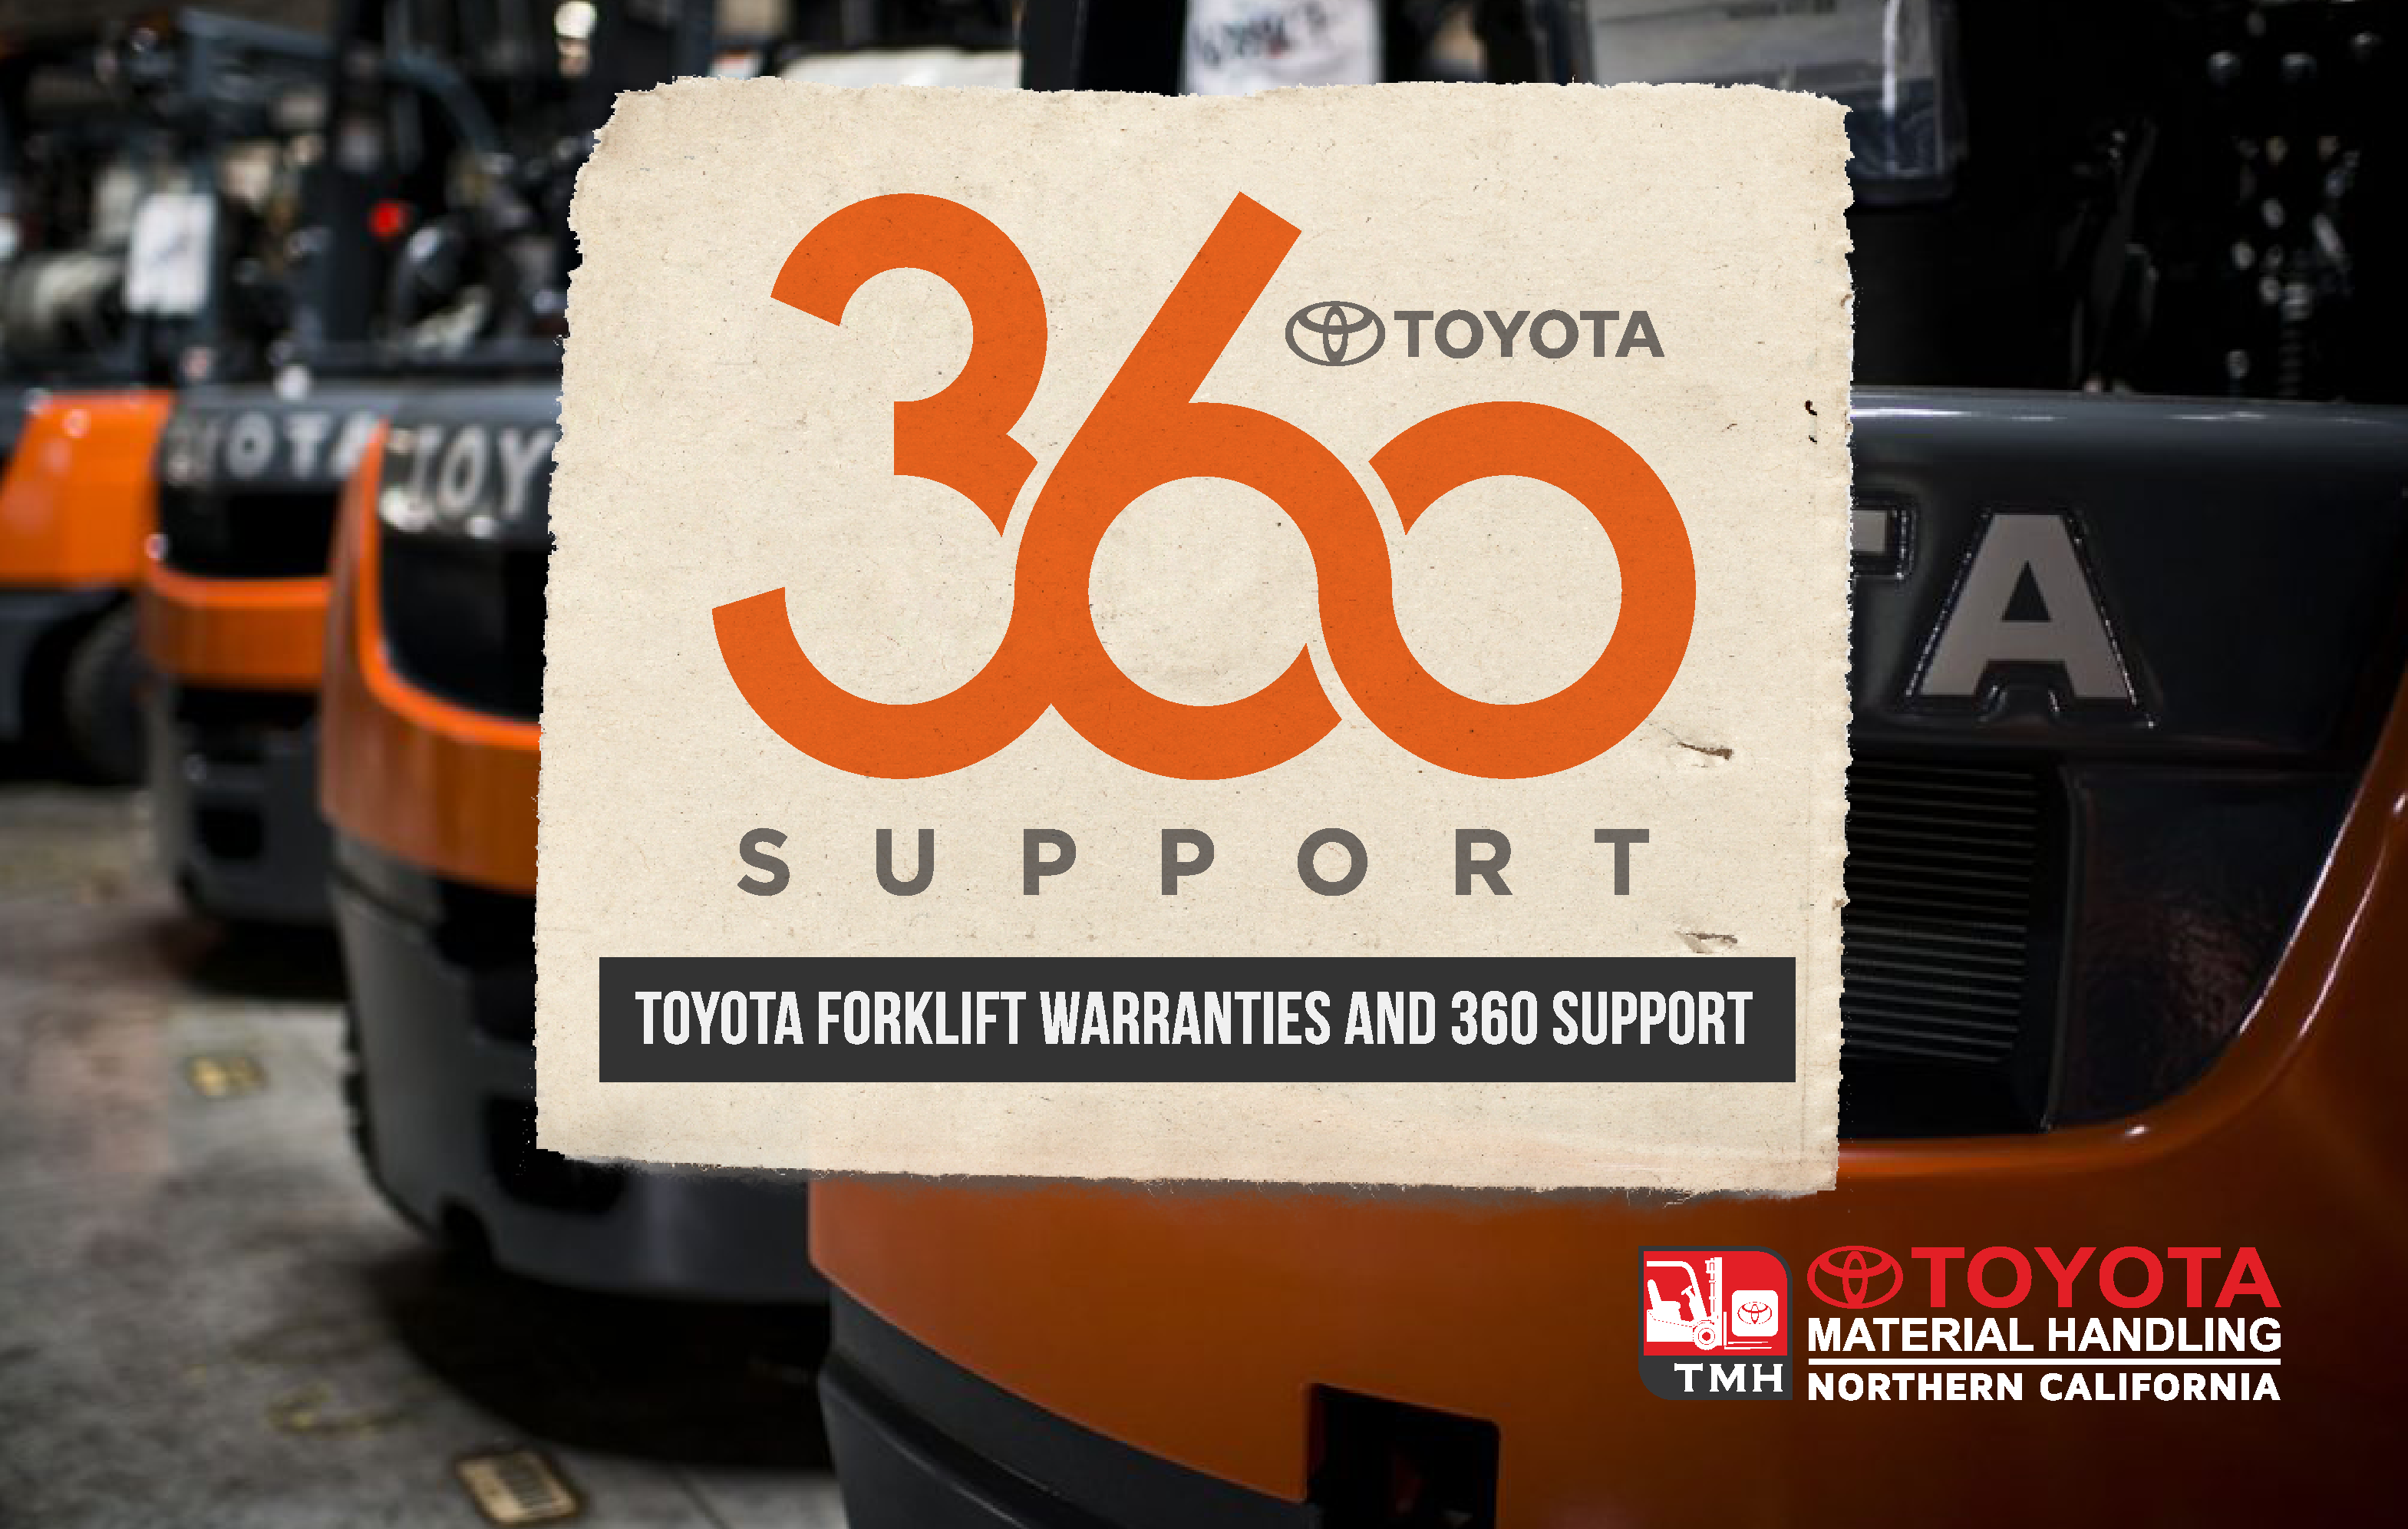 Toyota Forklift Warranties And 360 Support